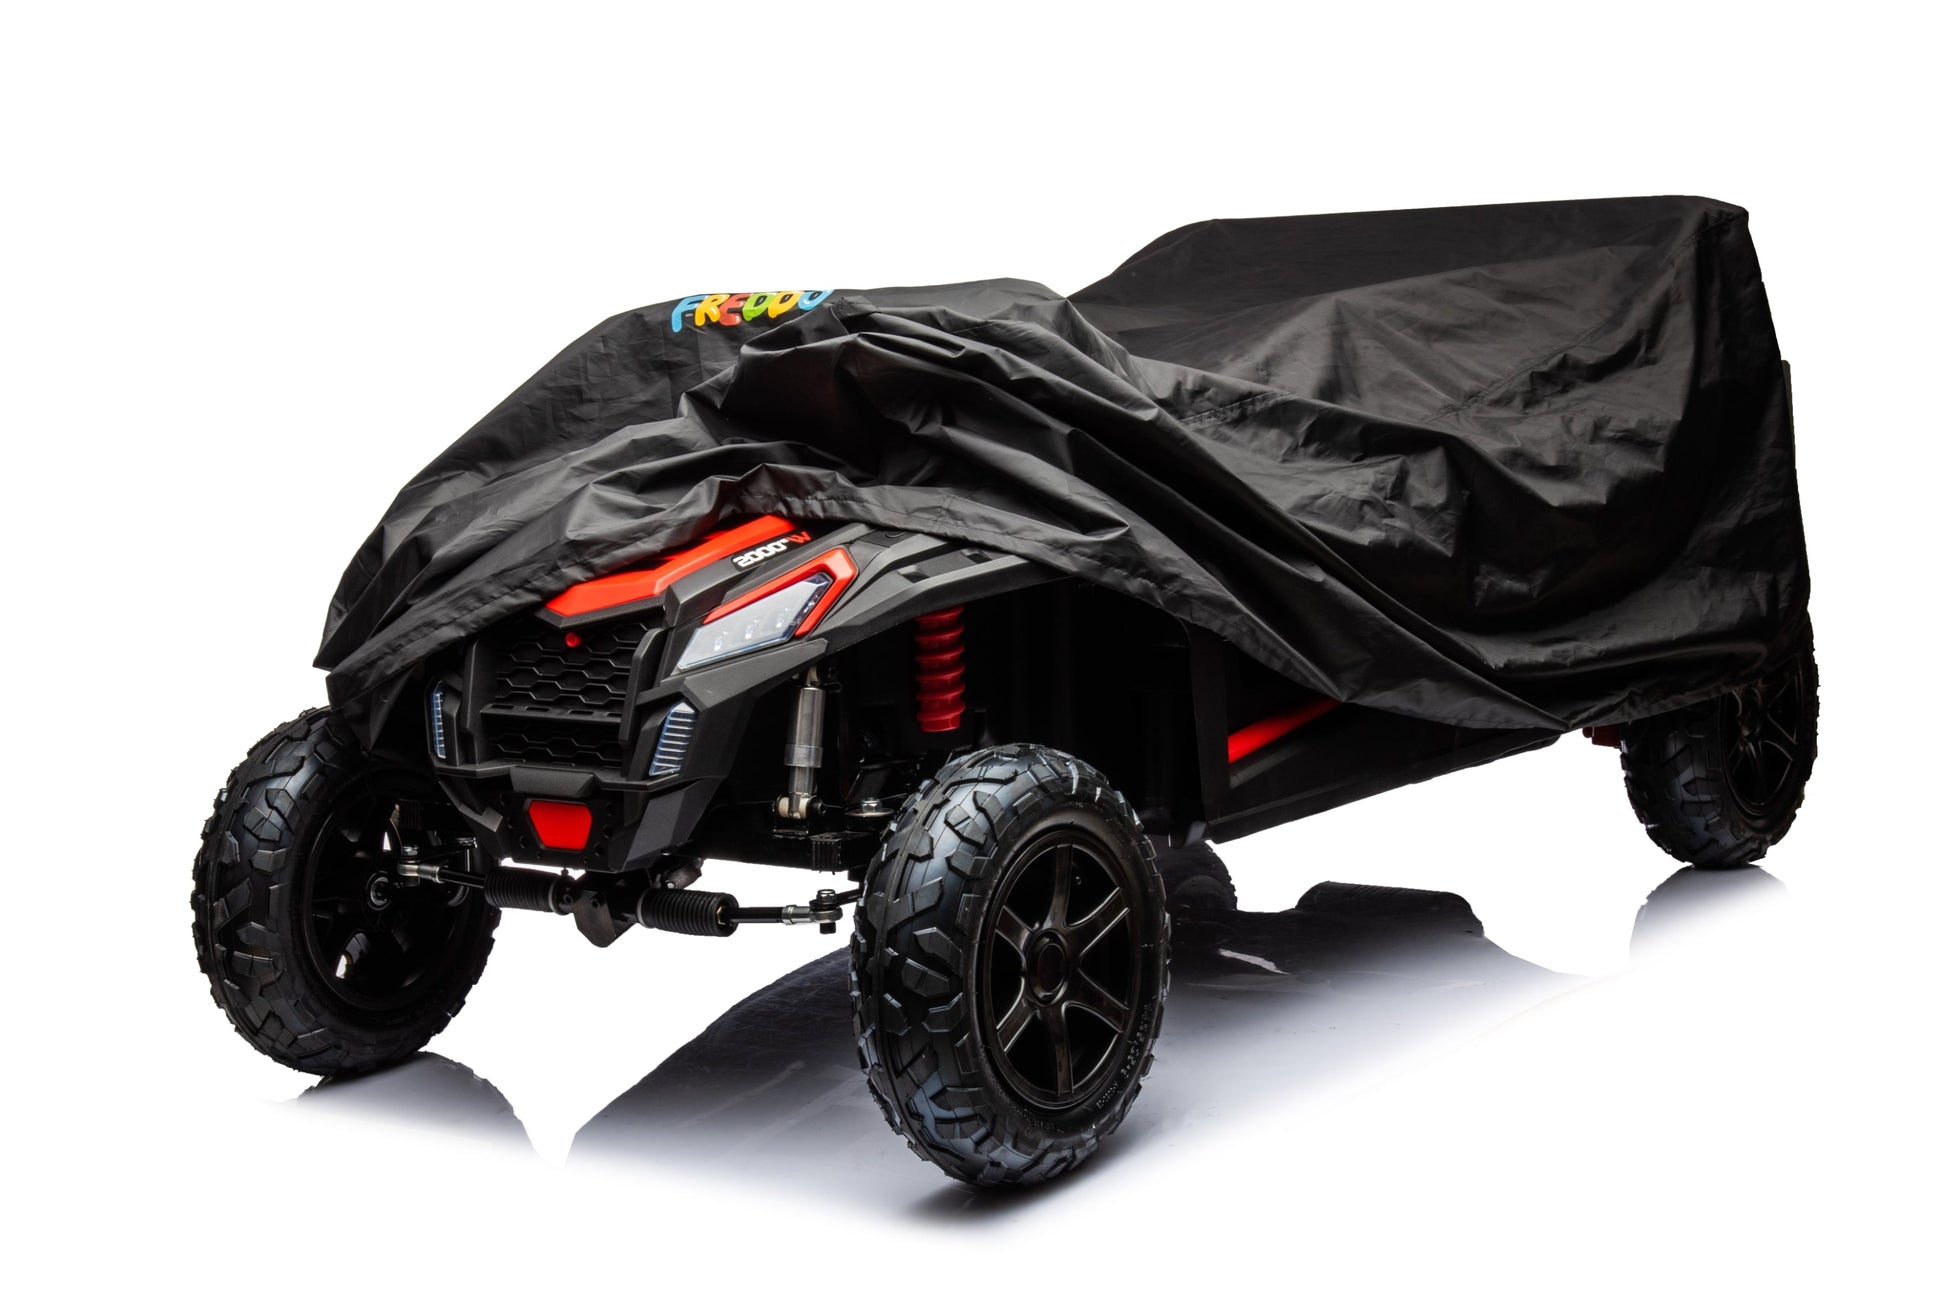 48V Freddo Beast XL Dune Buggy 4 Seater Ride on for Kids with Brushless Motor + Differential - DTI Direct USA